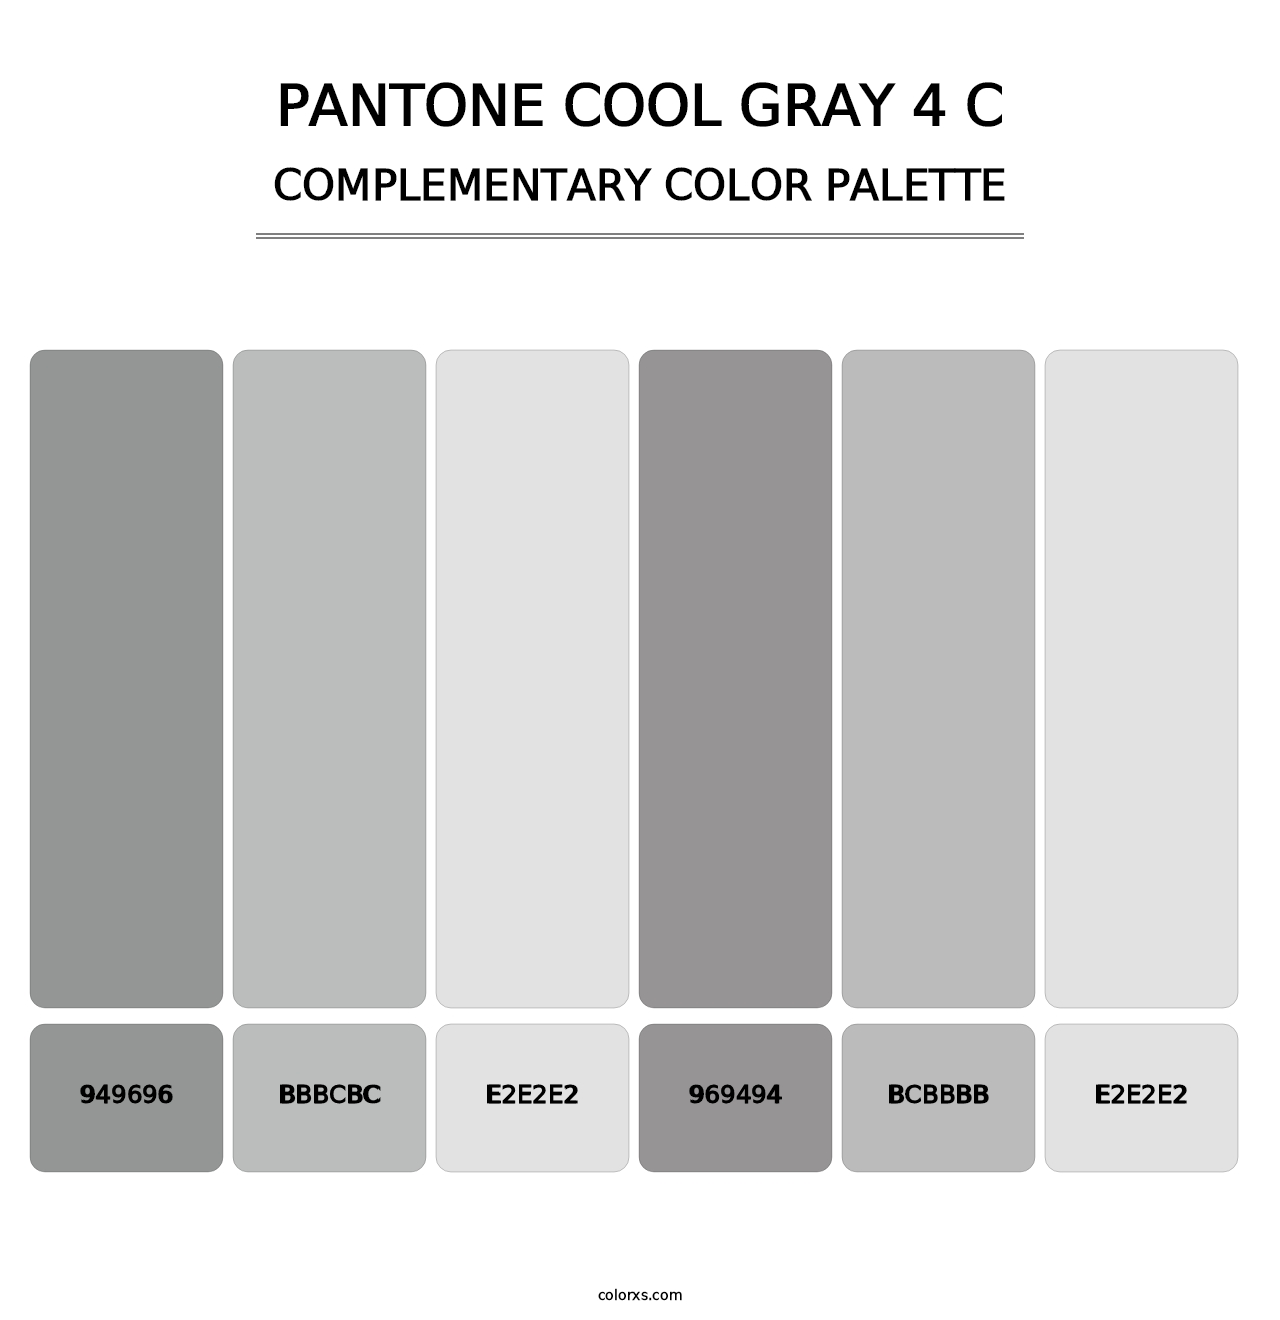 PANTONE Cool Gray 4 C - Complementary Color Palette